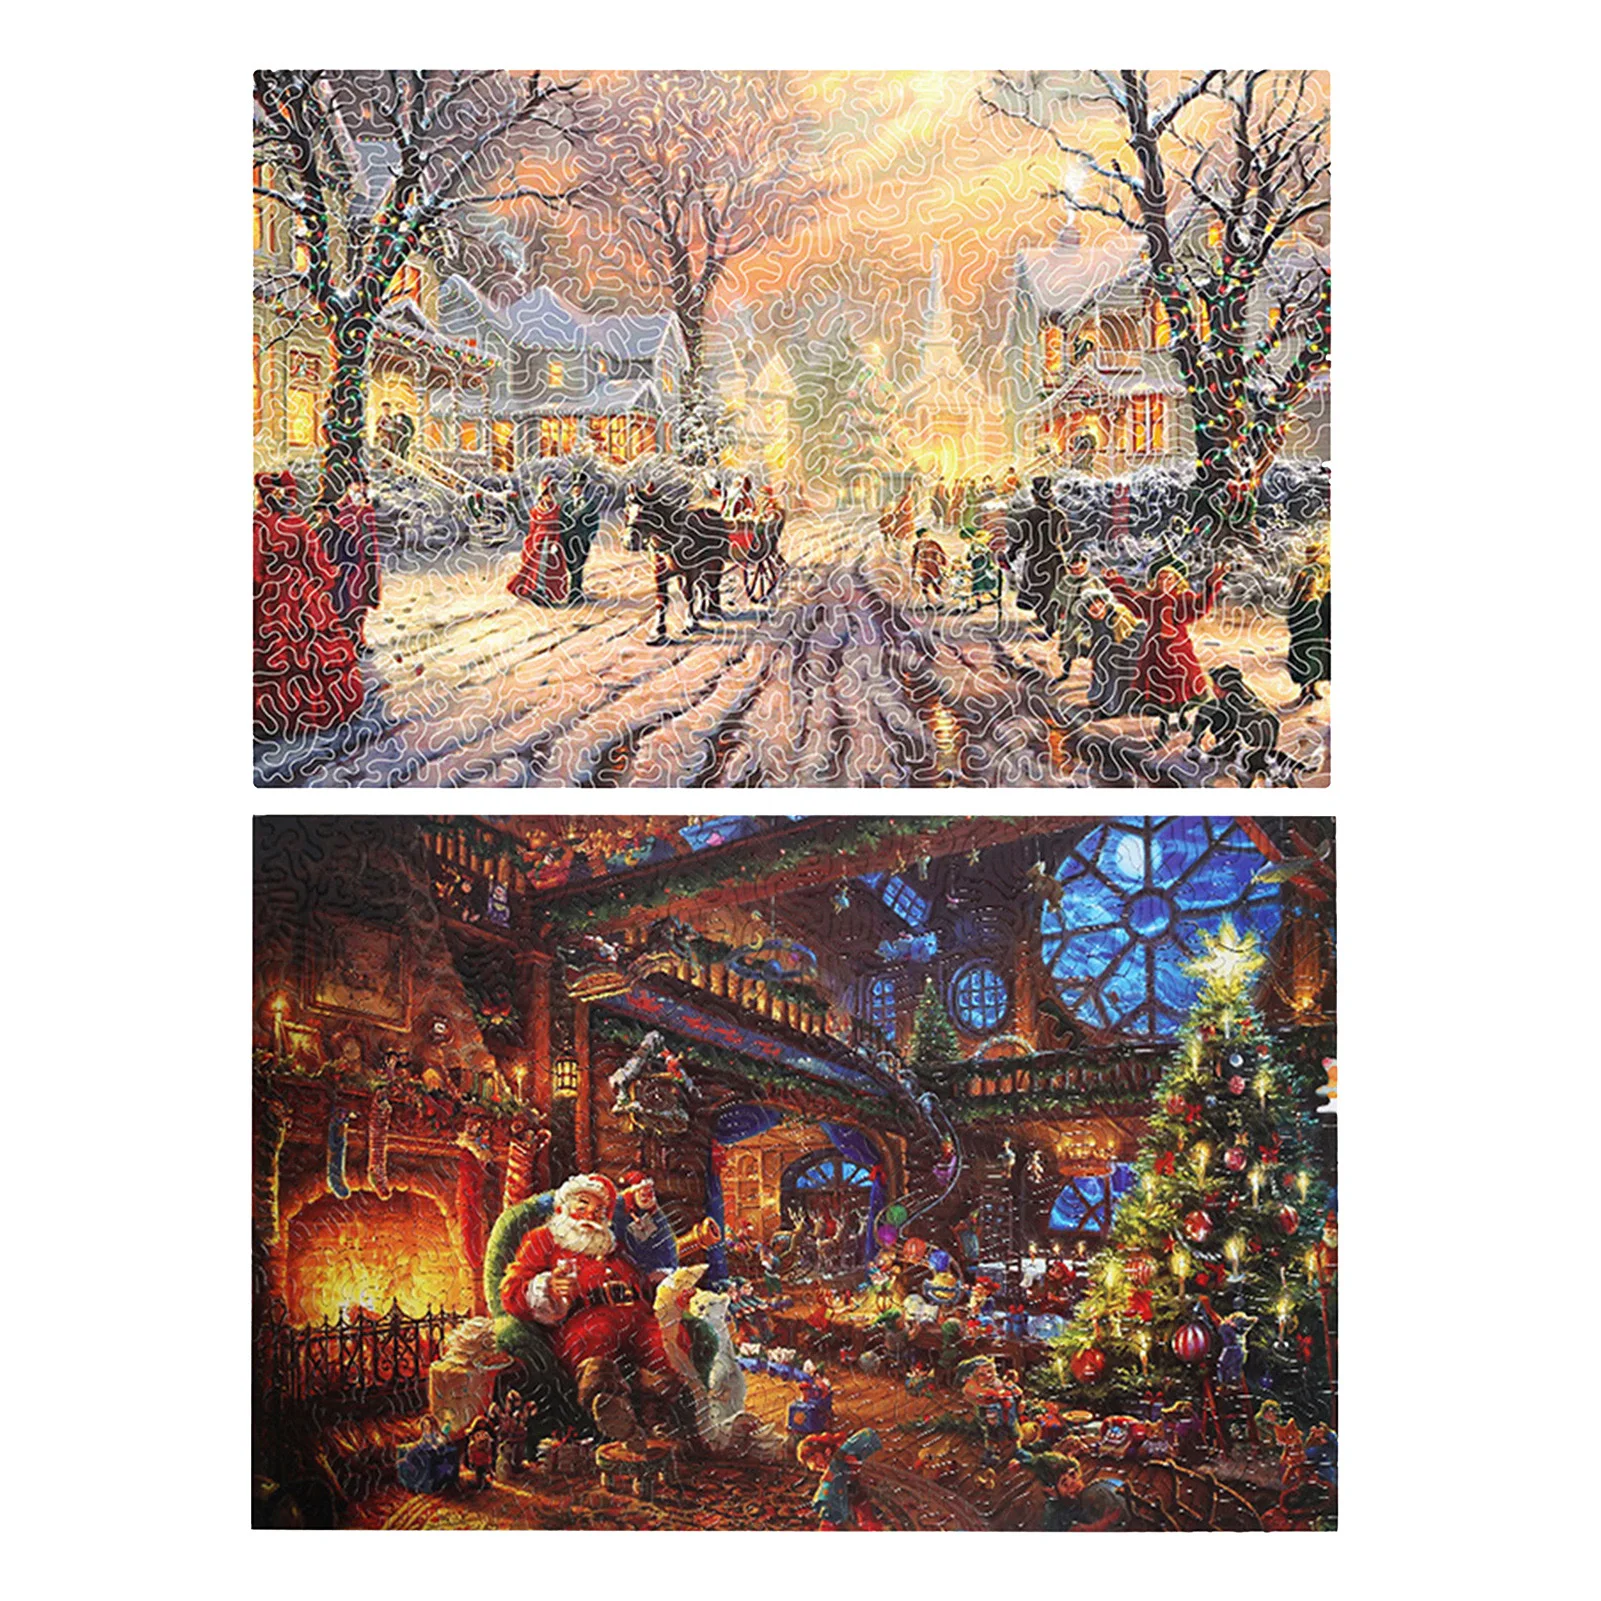 

Creativity Christmas Wooden Jigsaw Puzzle Challenging Training Logic Puzzle Game For Children High-quality Apposite